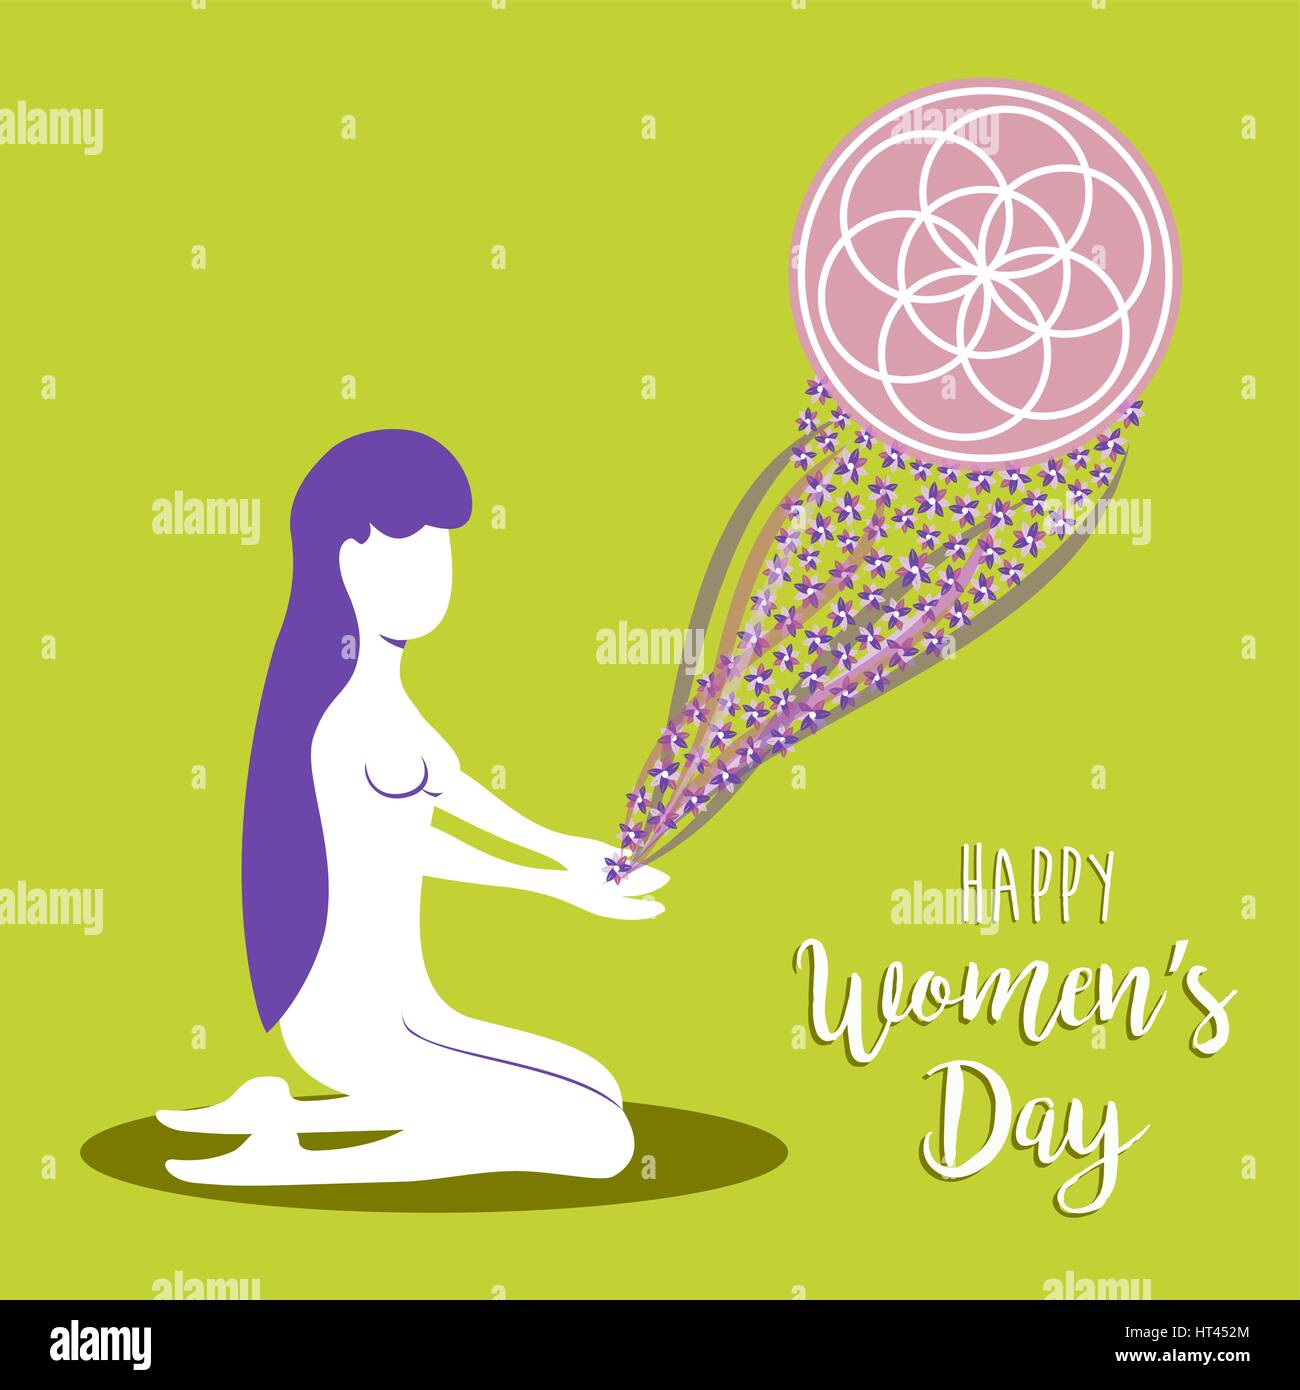 Happy international 8 march womens day illustration of woman in harmony and balance. Yoga meditation concept design. EPS10 vector. Stock Vector